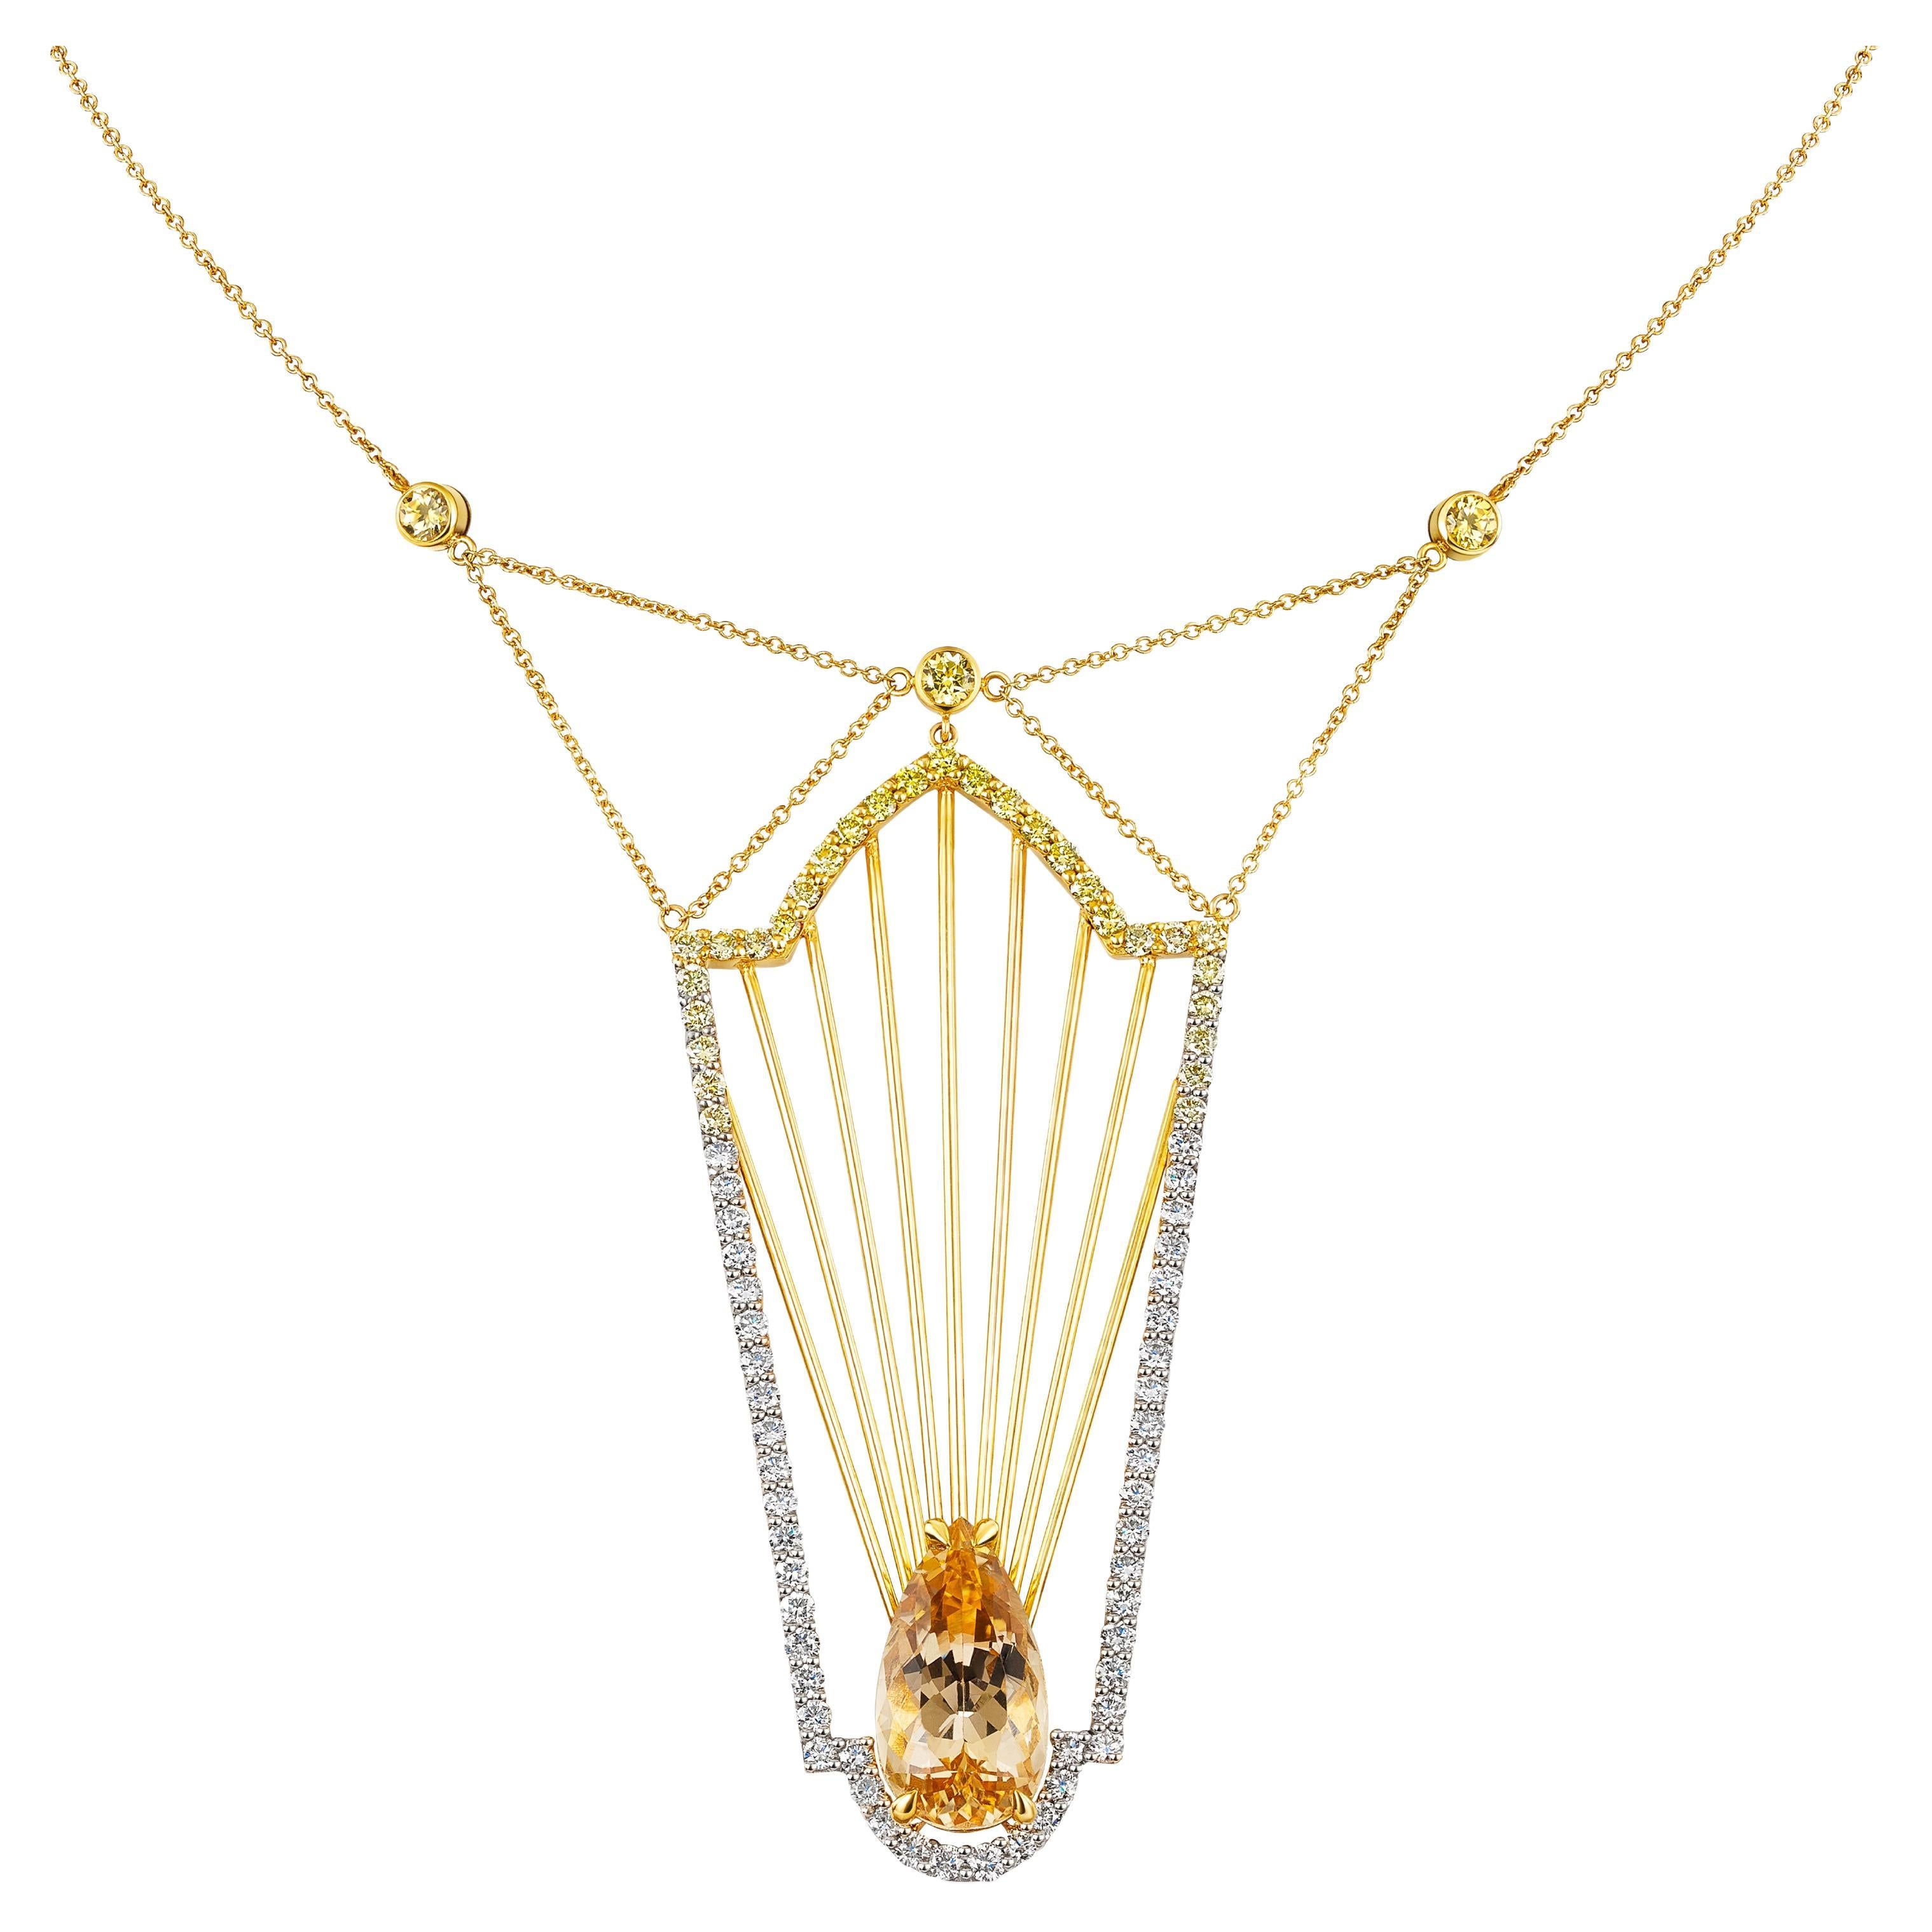 Aventina-Spencer, 10.00 Carat Imperial Topaz, Fancy Diamond, Sapphire Necklace For Sale